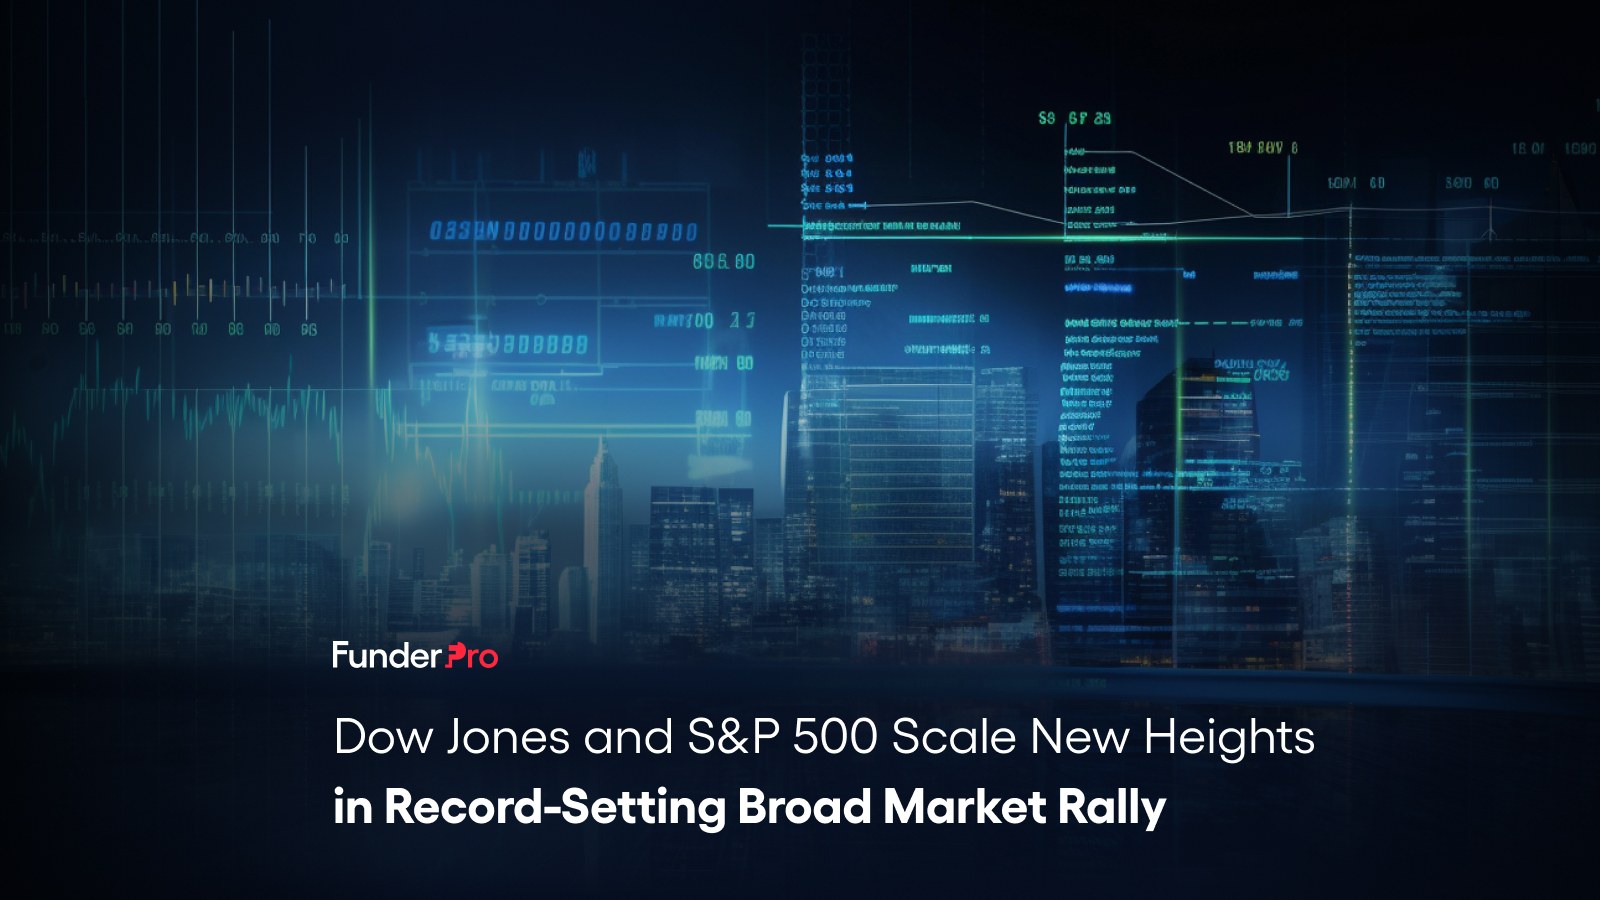 Dow Jones and S&P 500 Scale New Heights in Record-Setting Broad Market Rally